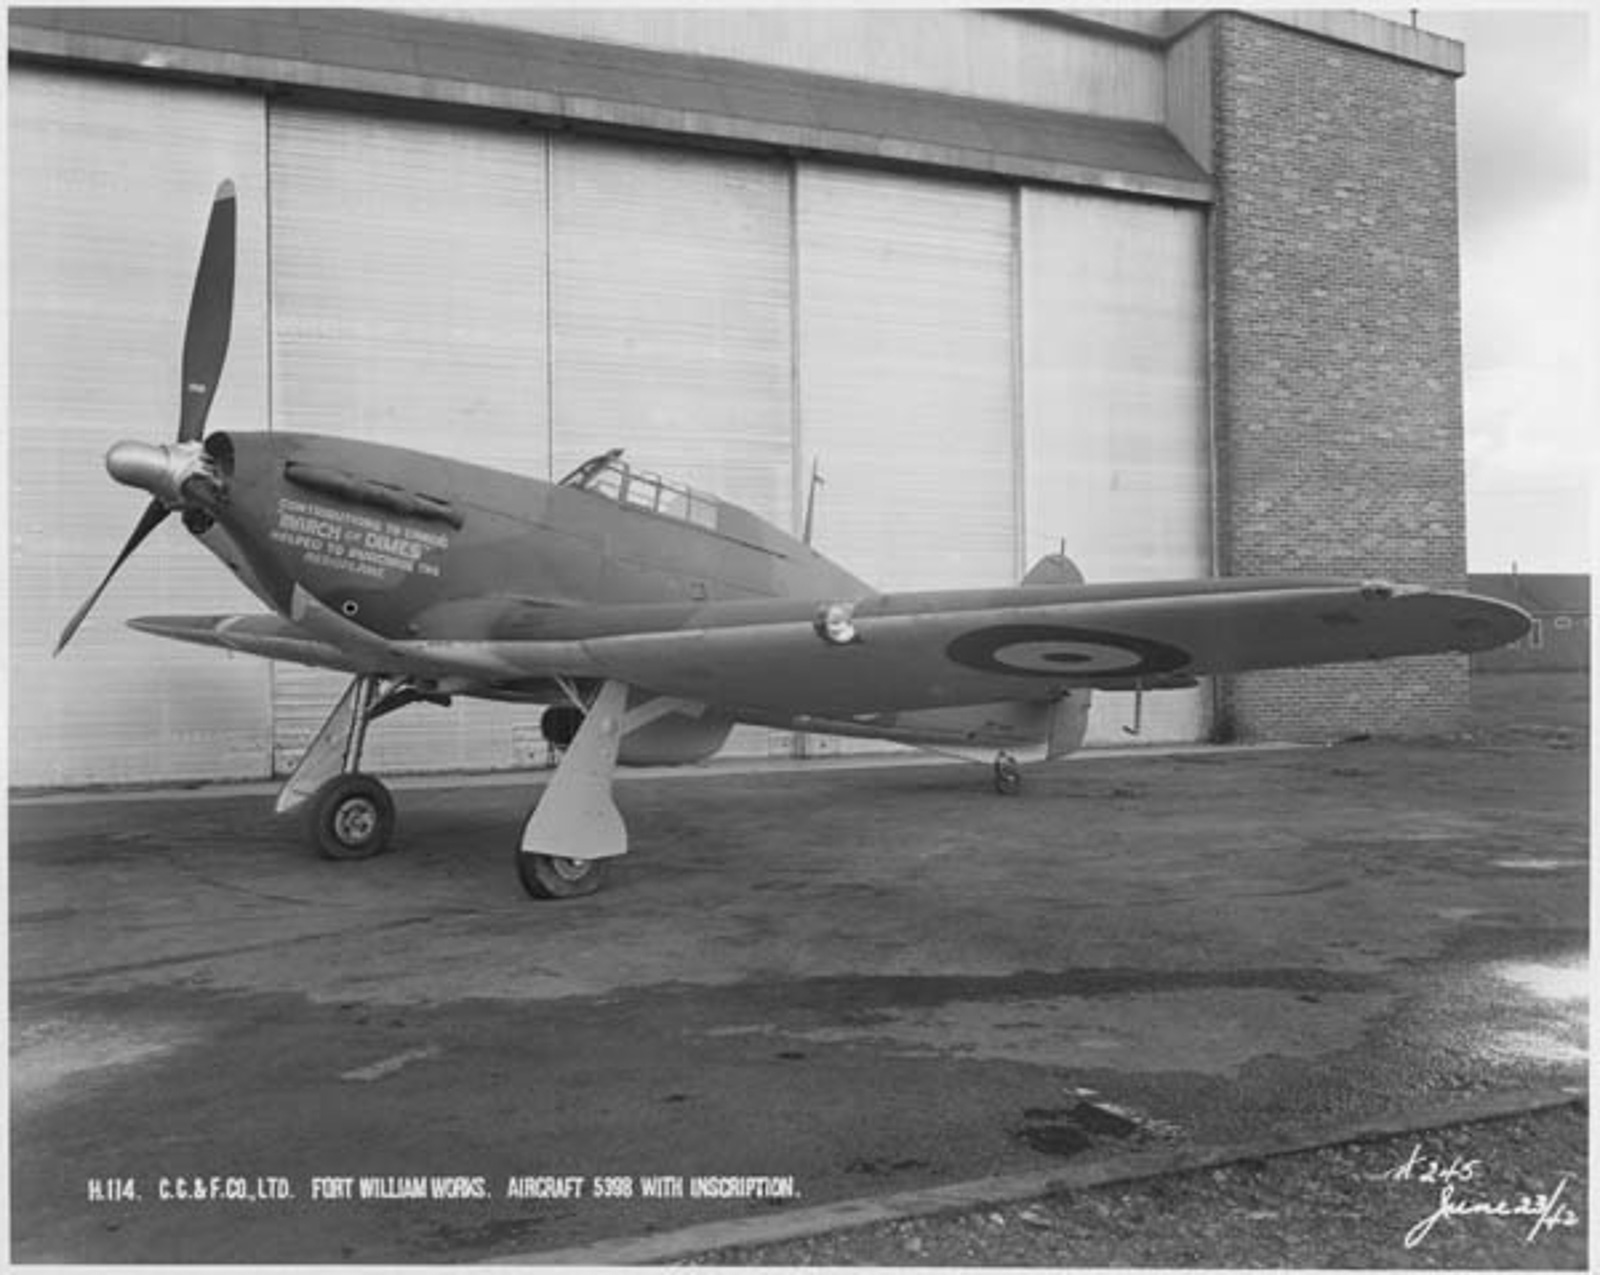 March Of Dimes Hawker Hurricane Mk.xii (rcaf 5398) At Fort William